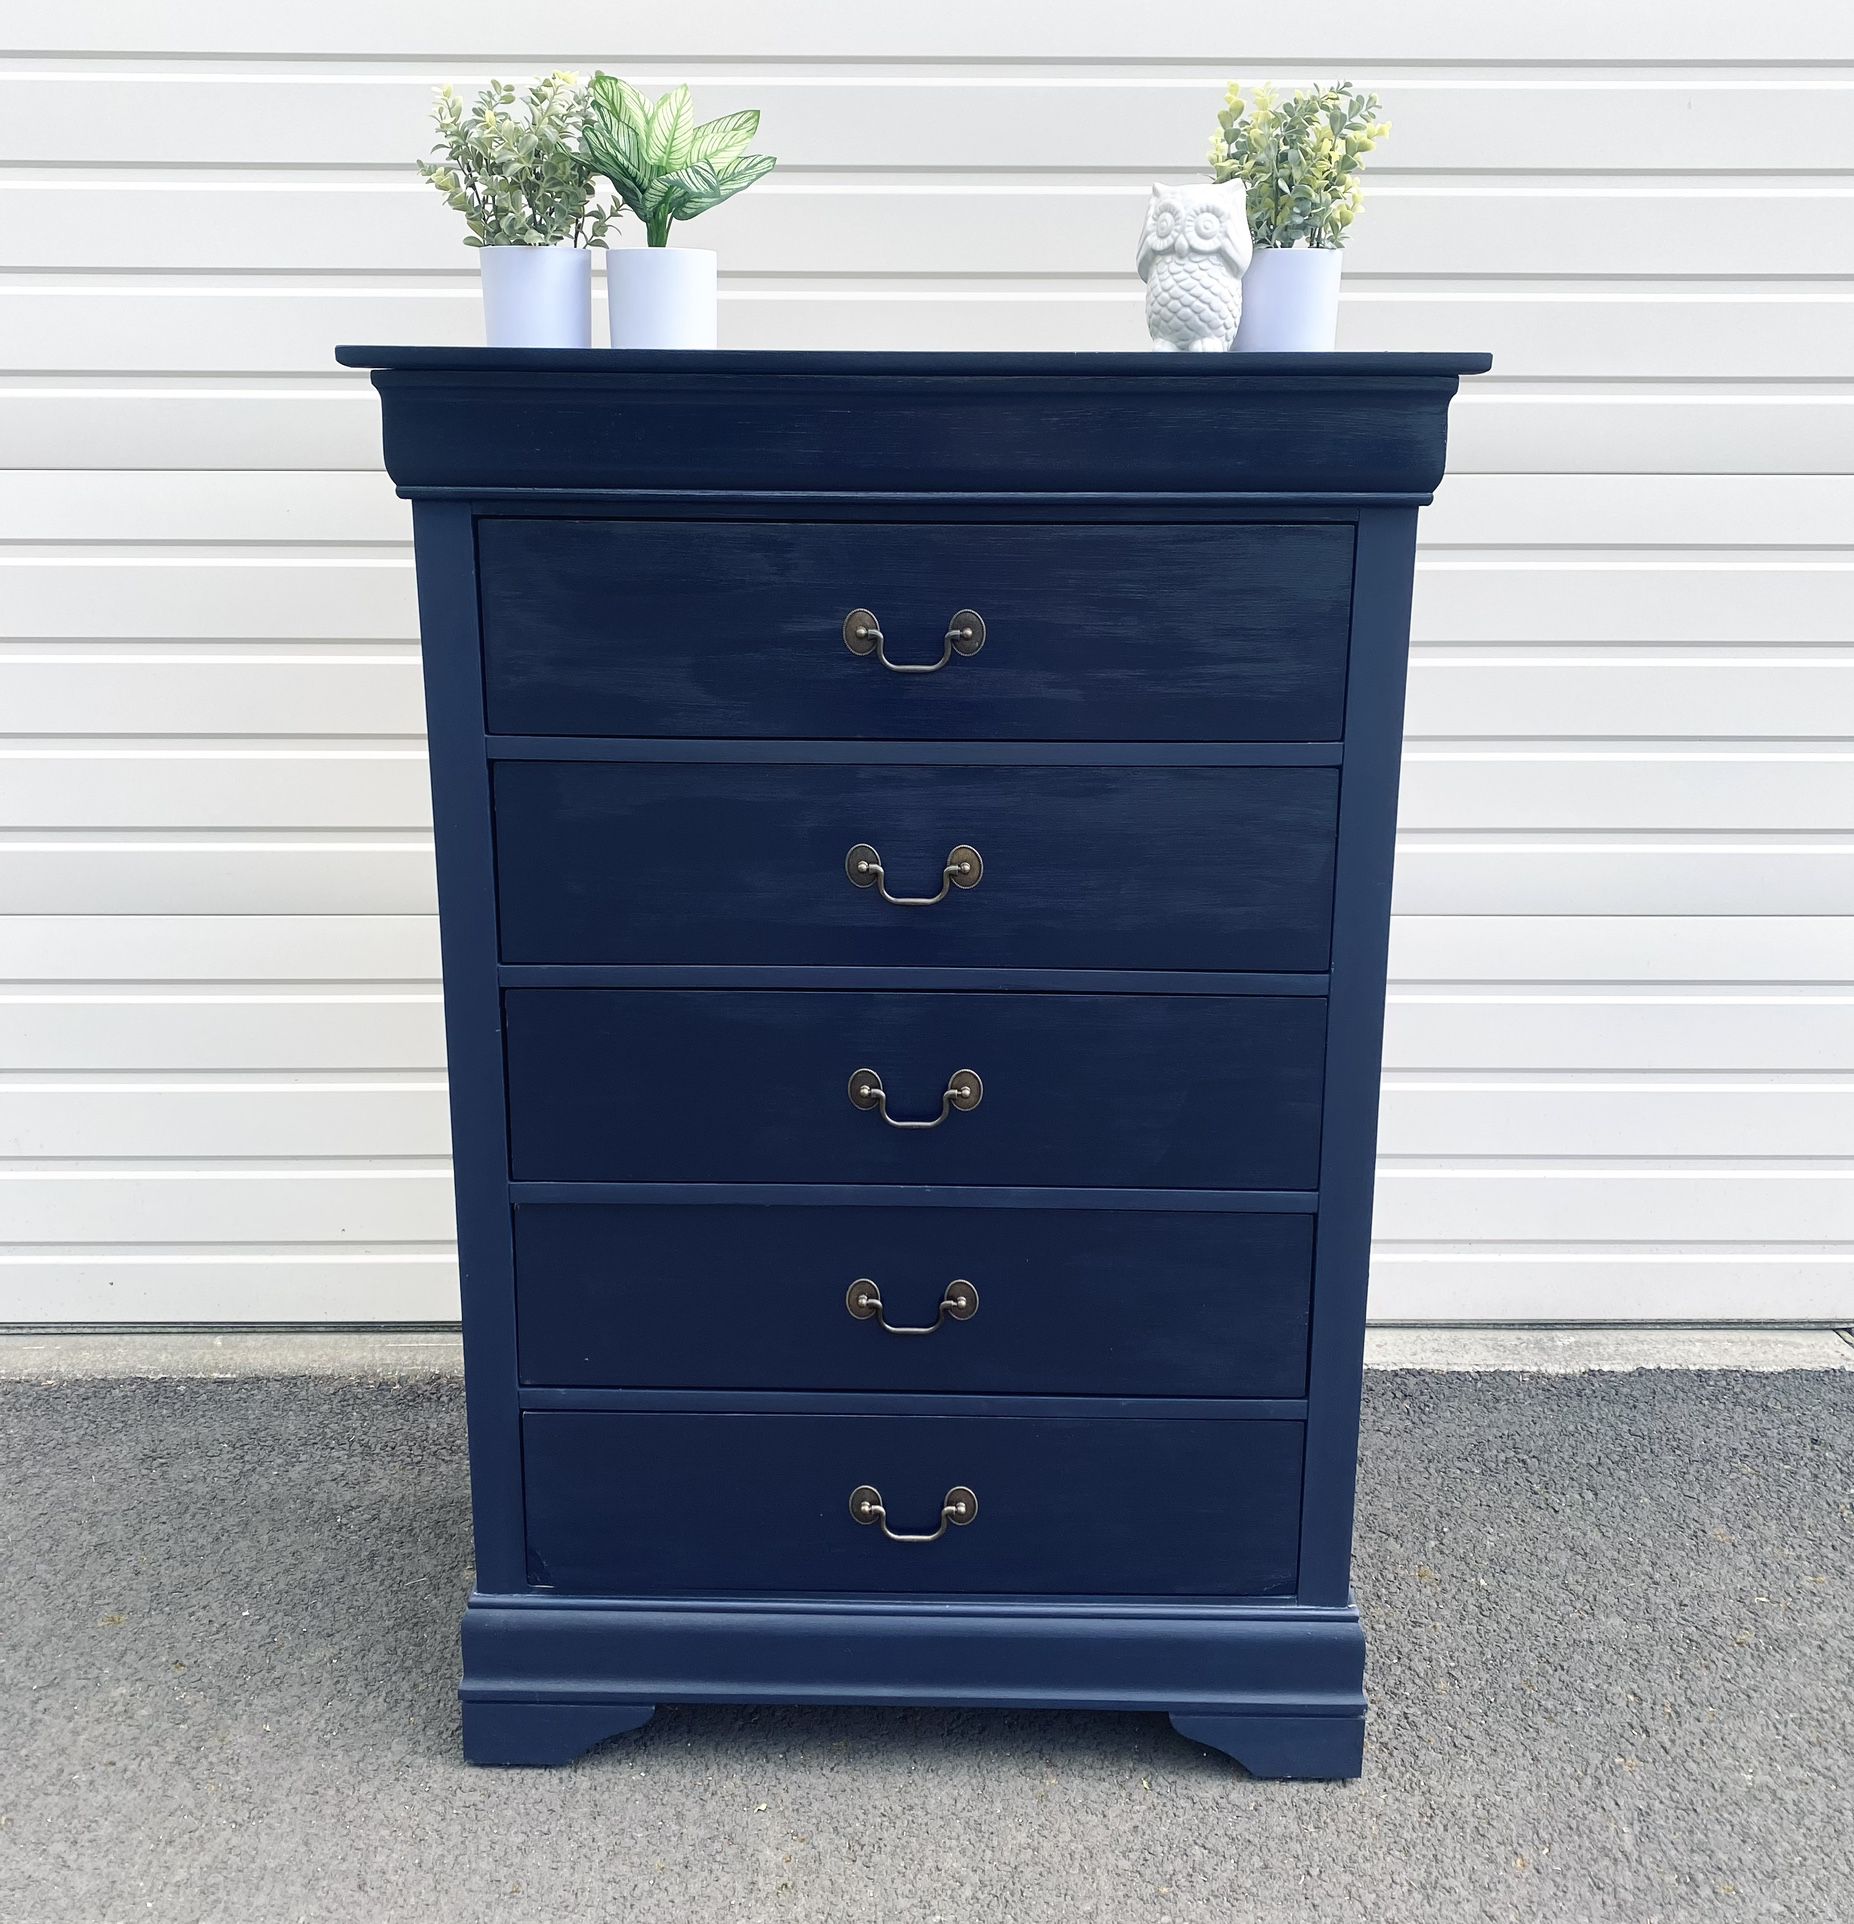 Refinished Tall Navy Dresser 